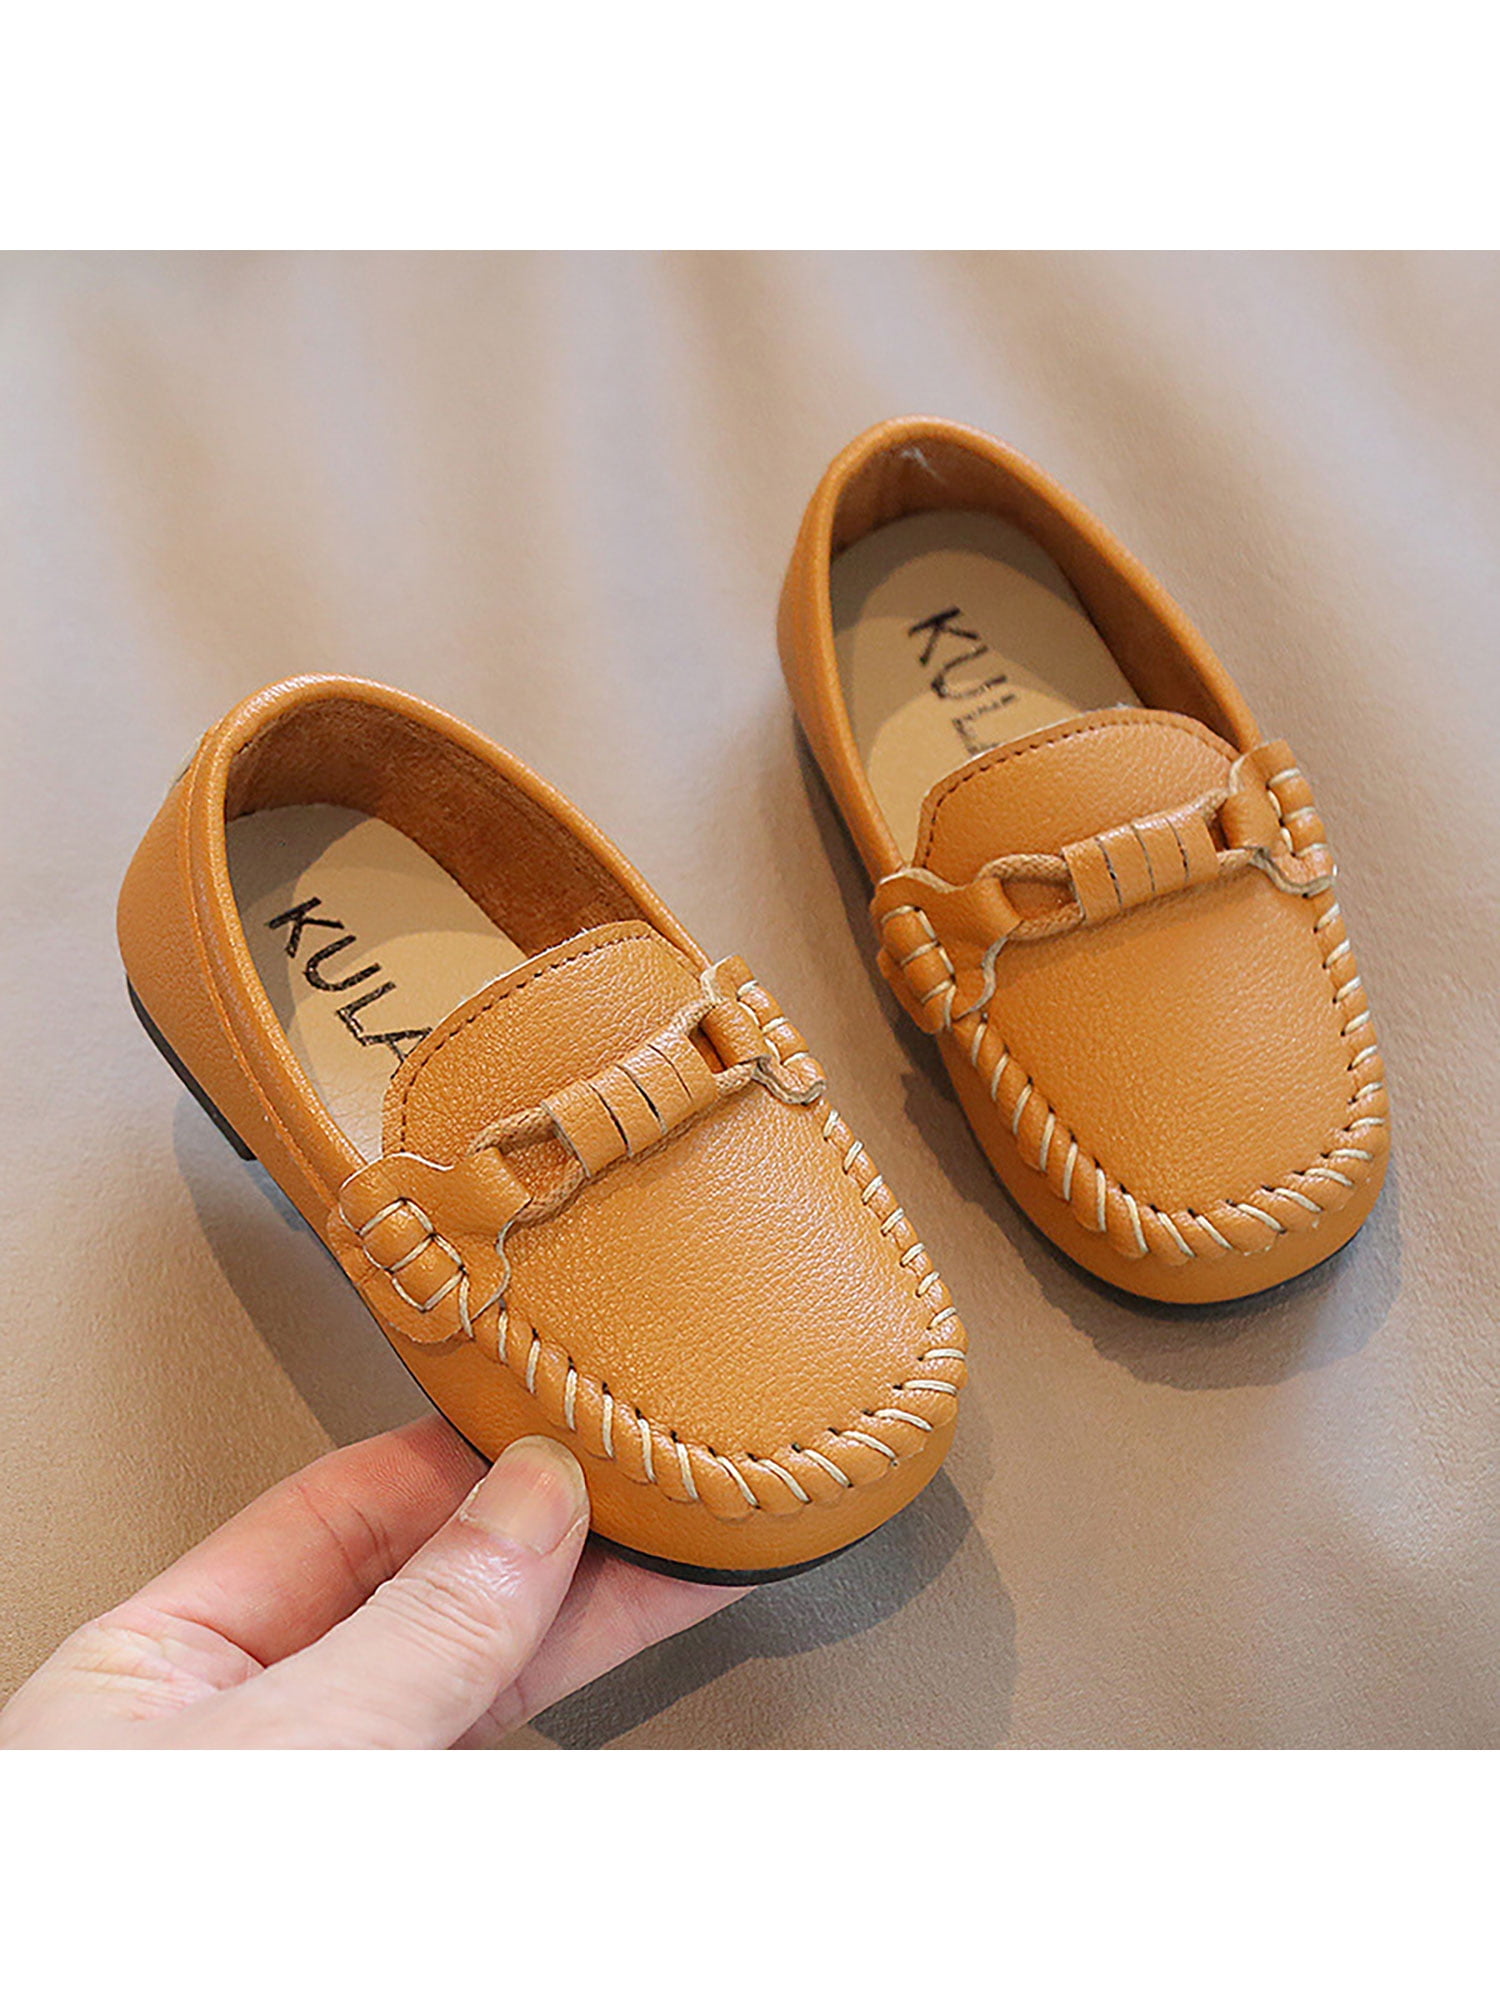 Girls Boys Flats Moccasins Slip On Loafers Unisex Boat Shoes Party Fashion Penny Loafer Yellow 8C - Walmart.com